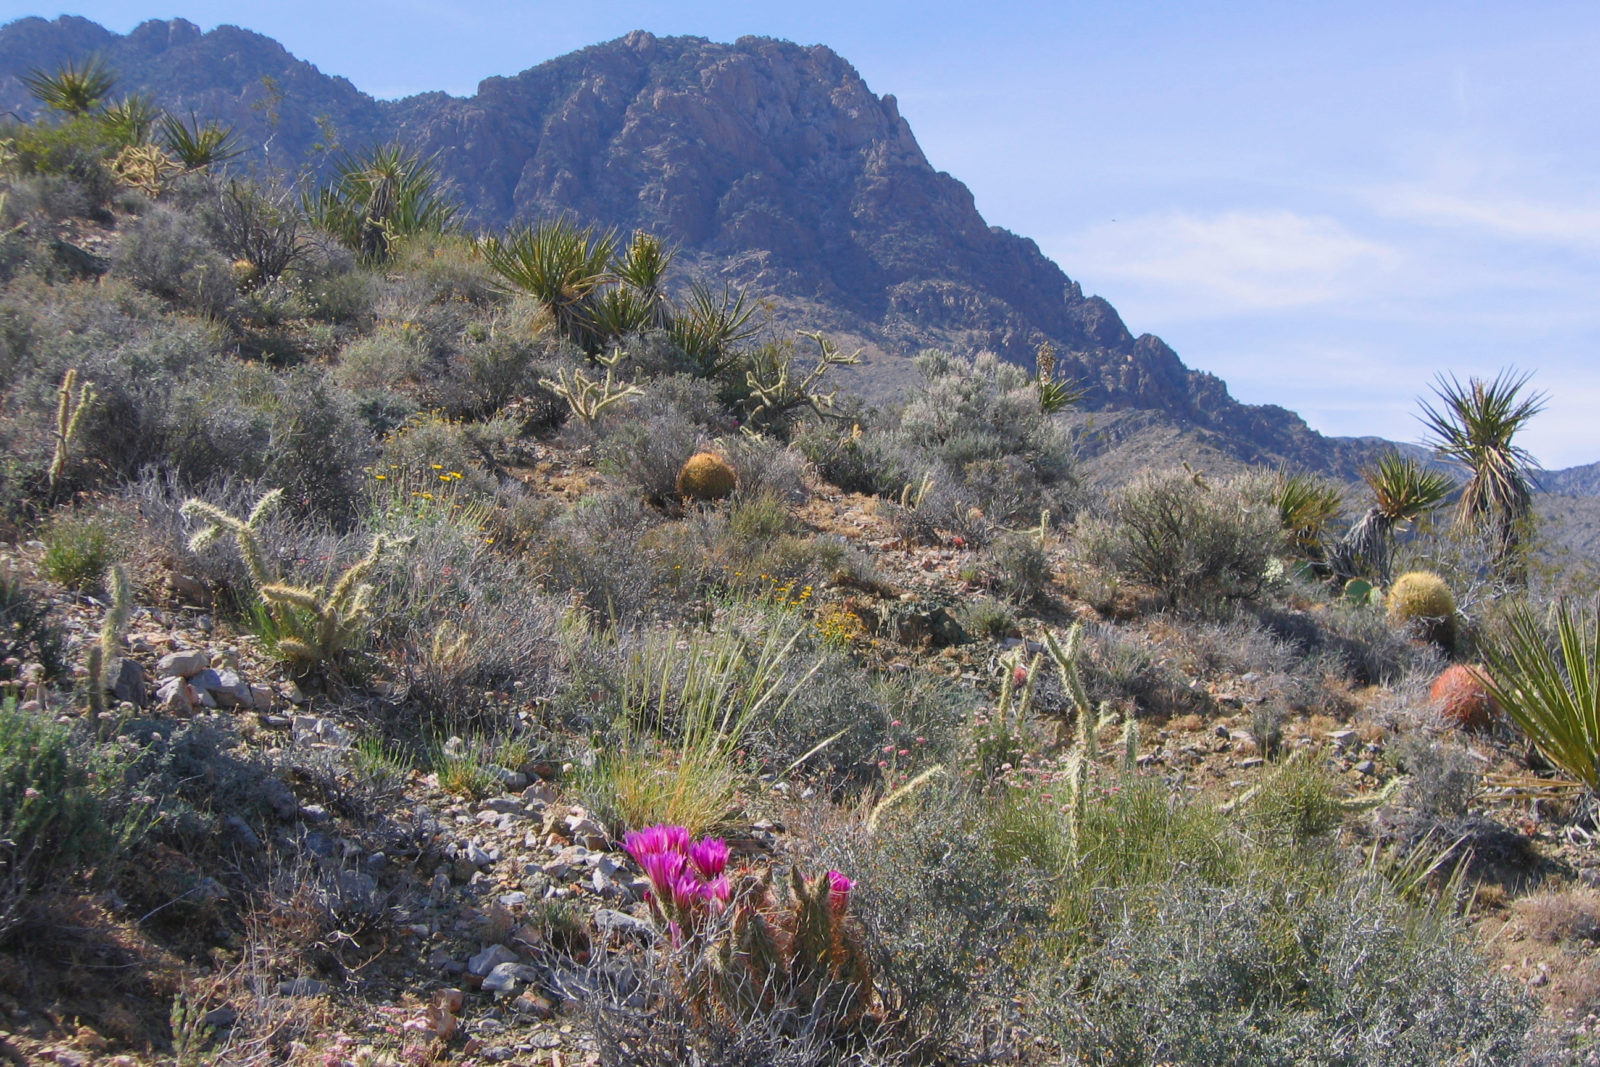 The Mojave National Preserve turned 20 this year, and was created as part of the 1994 California Desert Protection Act.